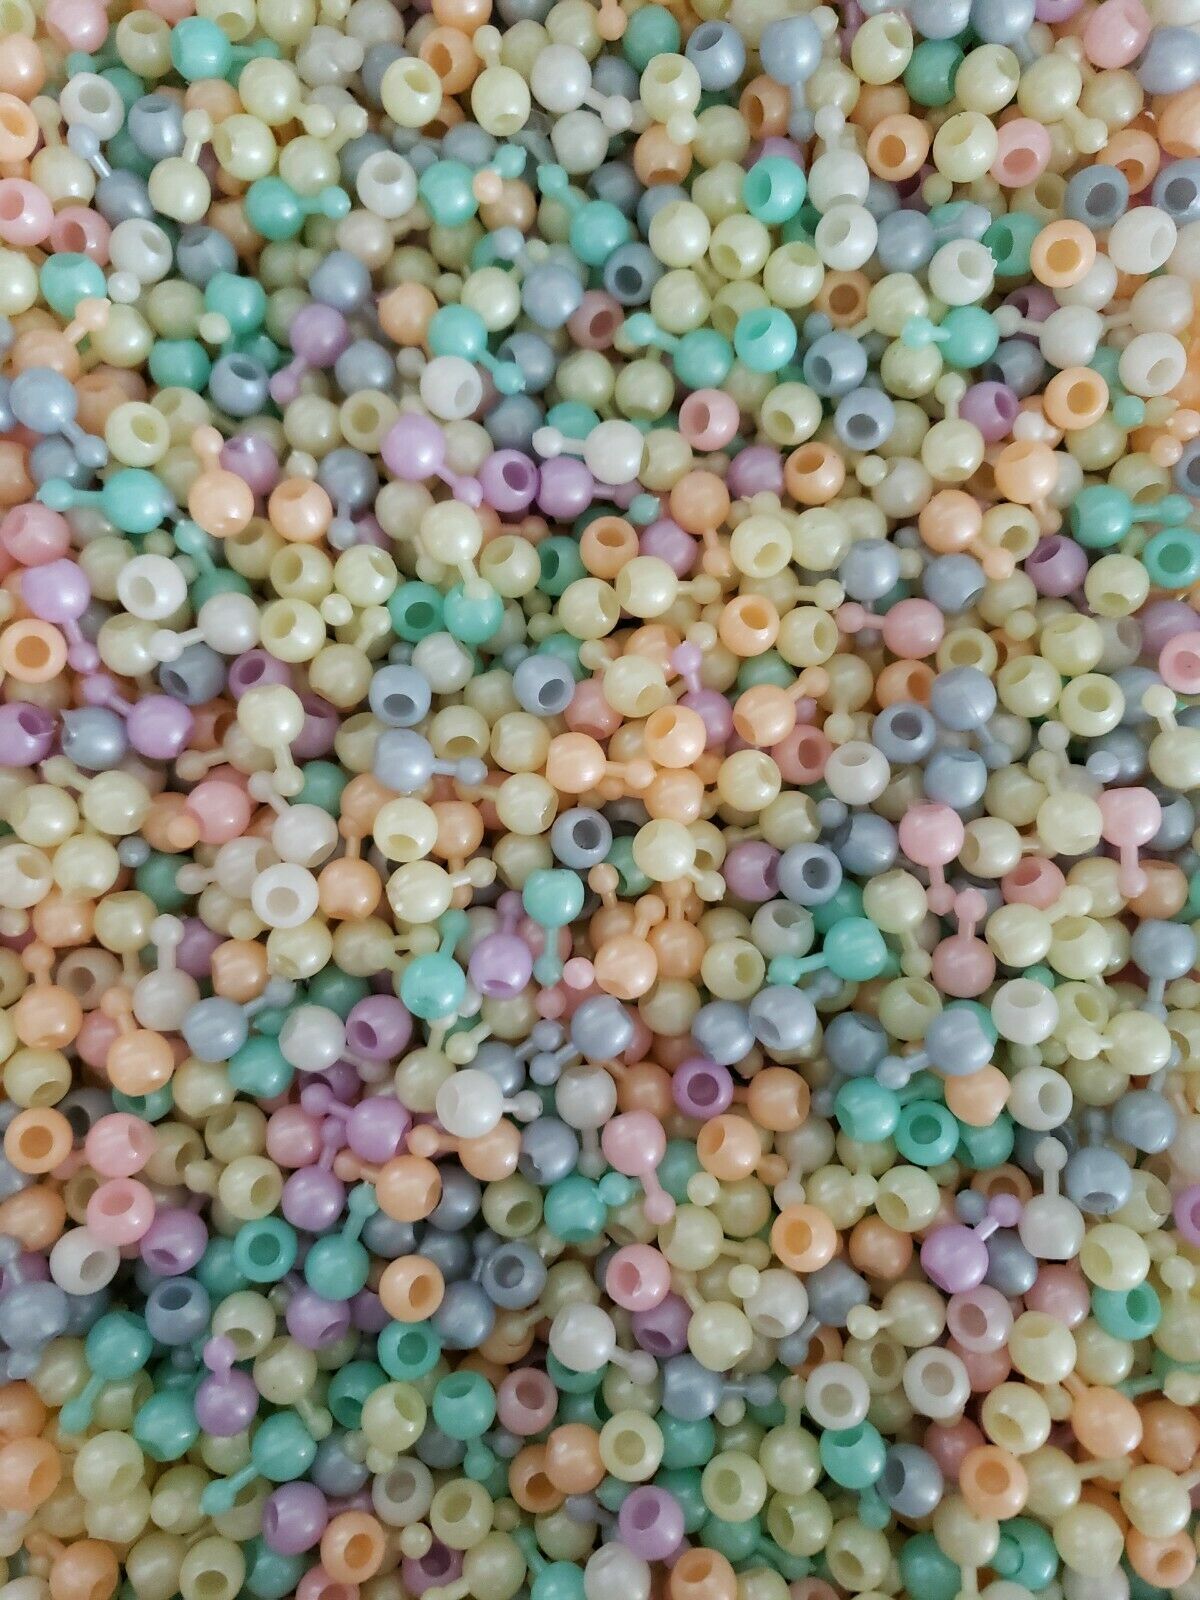 Vintage 1970's Pop Beads  About 3 ounce Bag of Pink Pastels Orange